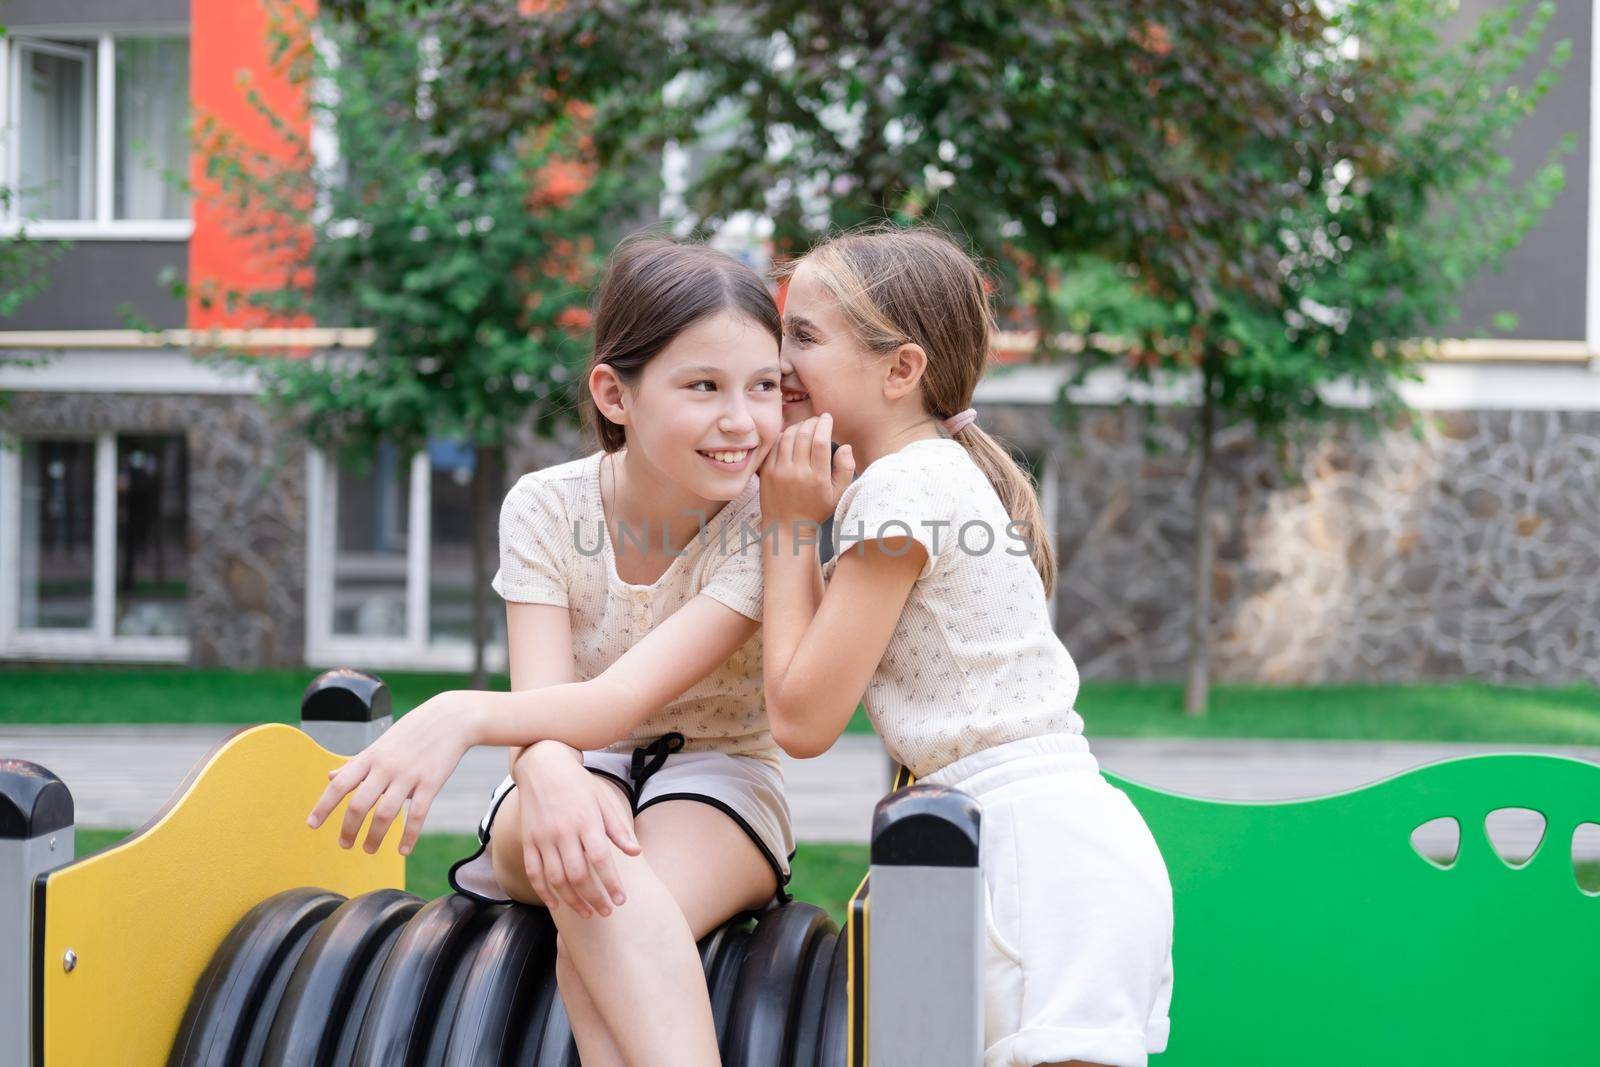 kids outdoors having fun on modern playground with new colorful equipment. sisterhood, friendship. two charming girls playing outdoors. sister, bffs, friends by oliavesna